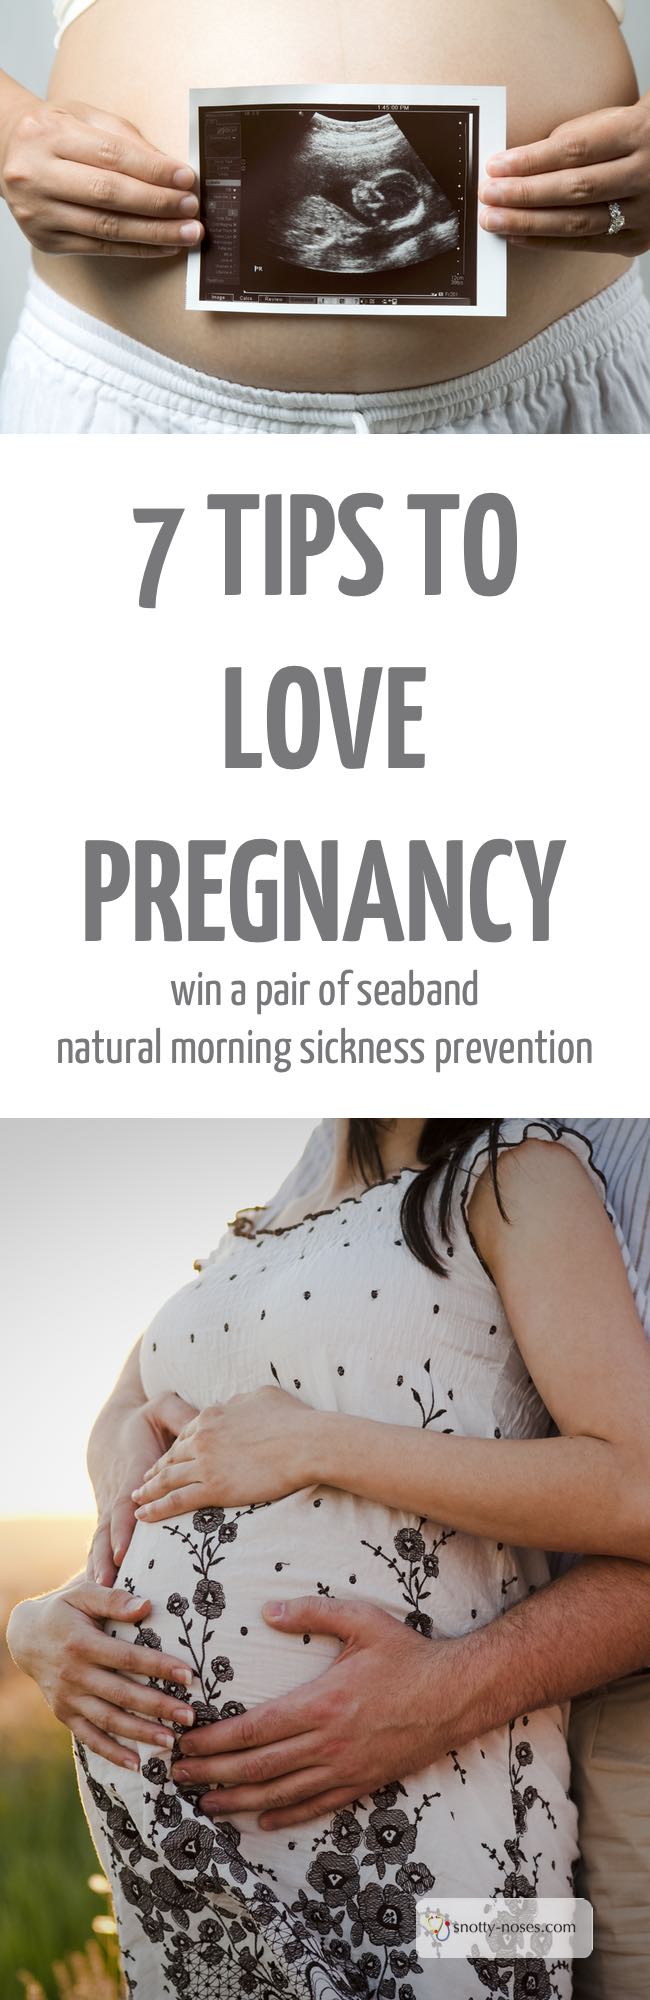 7 Tips to Love Your Pregnancy. Pregnancy is a magical time but can be ruined by fatigue and nausea. Here are 7 tips from a practising mid wife to help you flourish during your pregnancy.